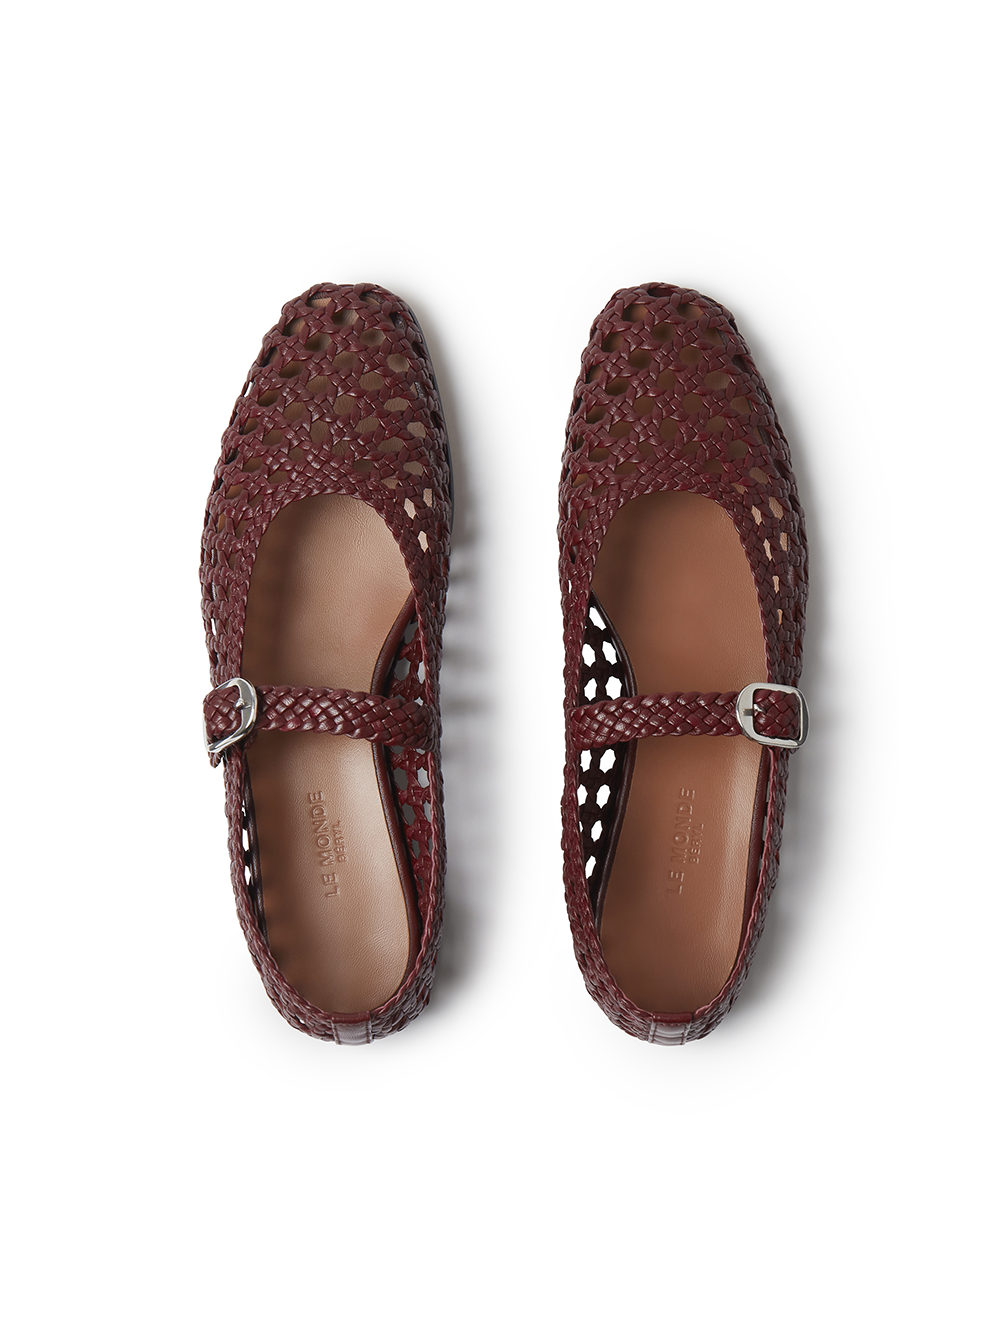 MARY JANE WOVEN LEATHER